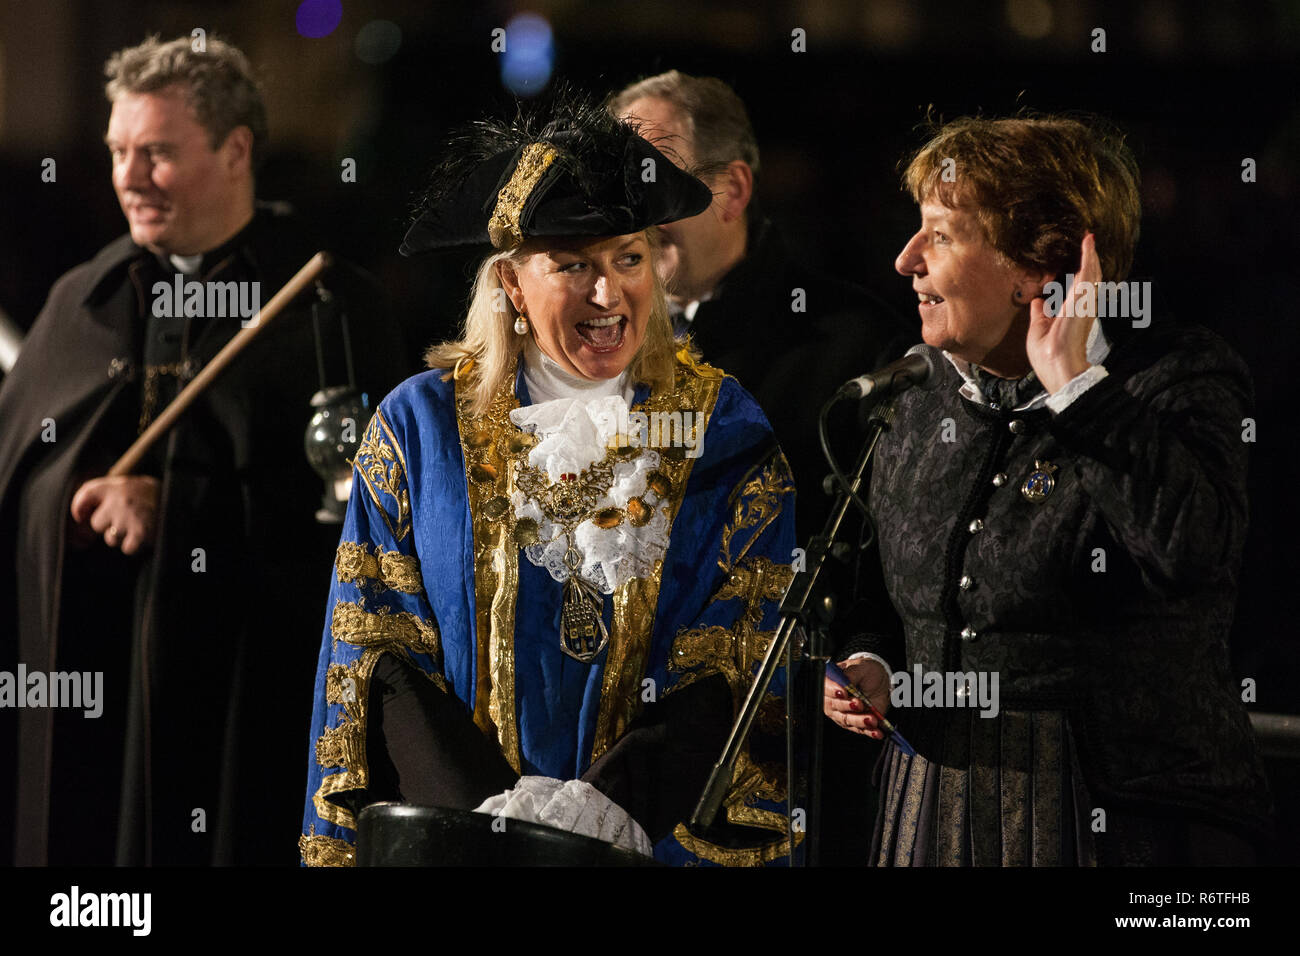 London, UK. 6th December, 2018. The Mayor of Westminster, Councillor Lindsey Hall, and the Mayor of Oslo, Marianne Borgen, prepare the crowd gathered in Trafalgar Square for the switching on of the lights on the Christmas tree. A spruce tree selected from the forests surrounding Oslo has been gifted to the UK by the Norwegian government in gratitude for its support during World War II since 1947. Energy-efficient light bulbs are now used to decorate the tree. Credit: Mark Kerrison/Alamy Live News Stock Photo